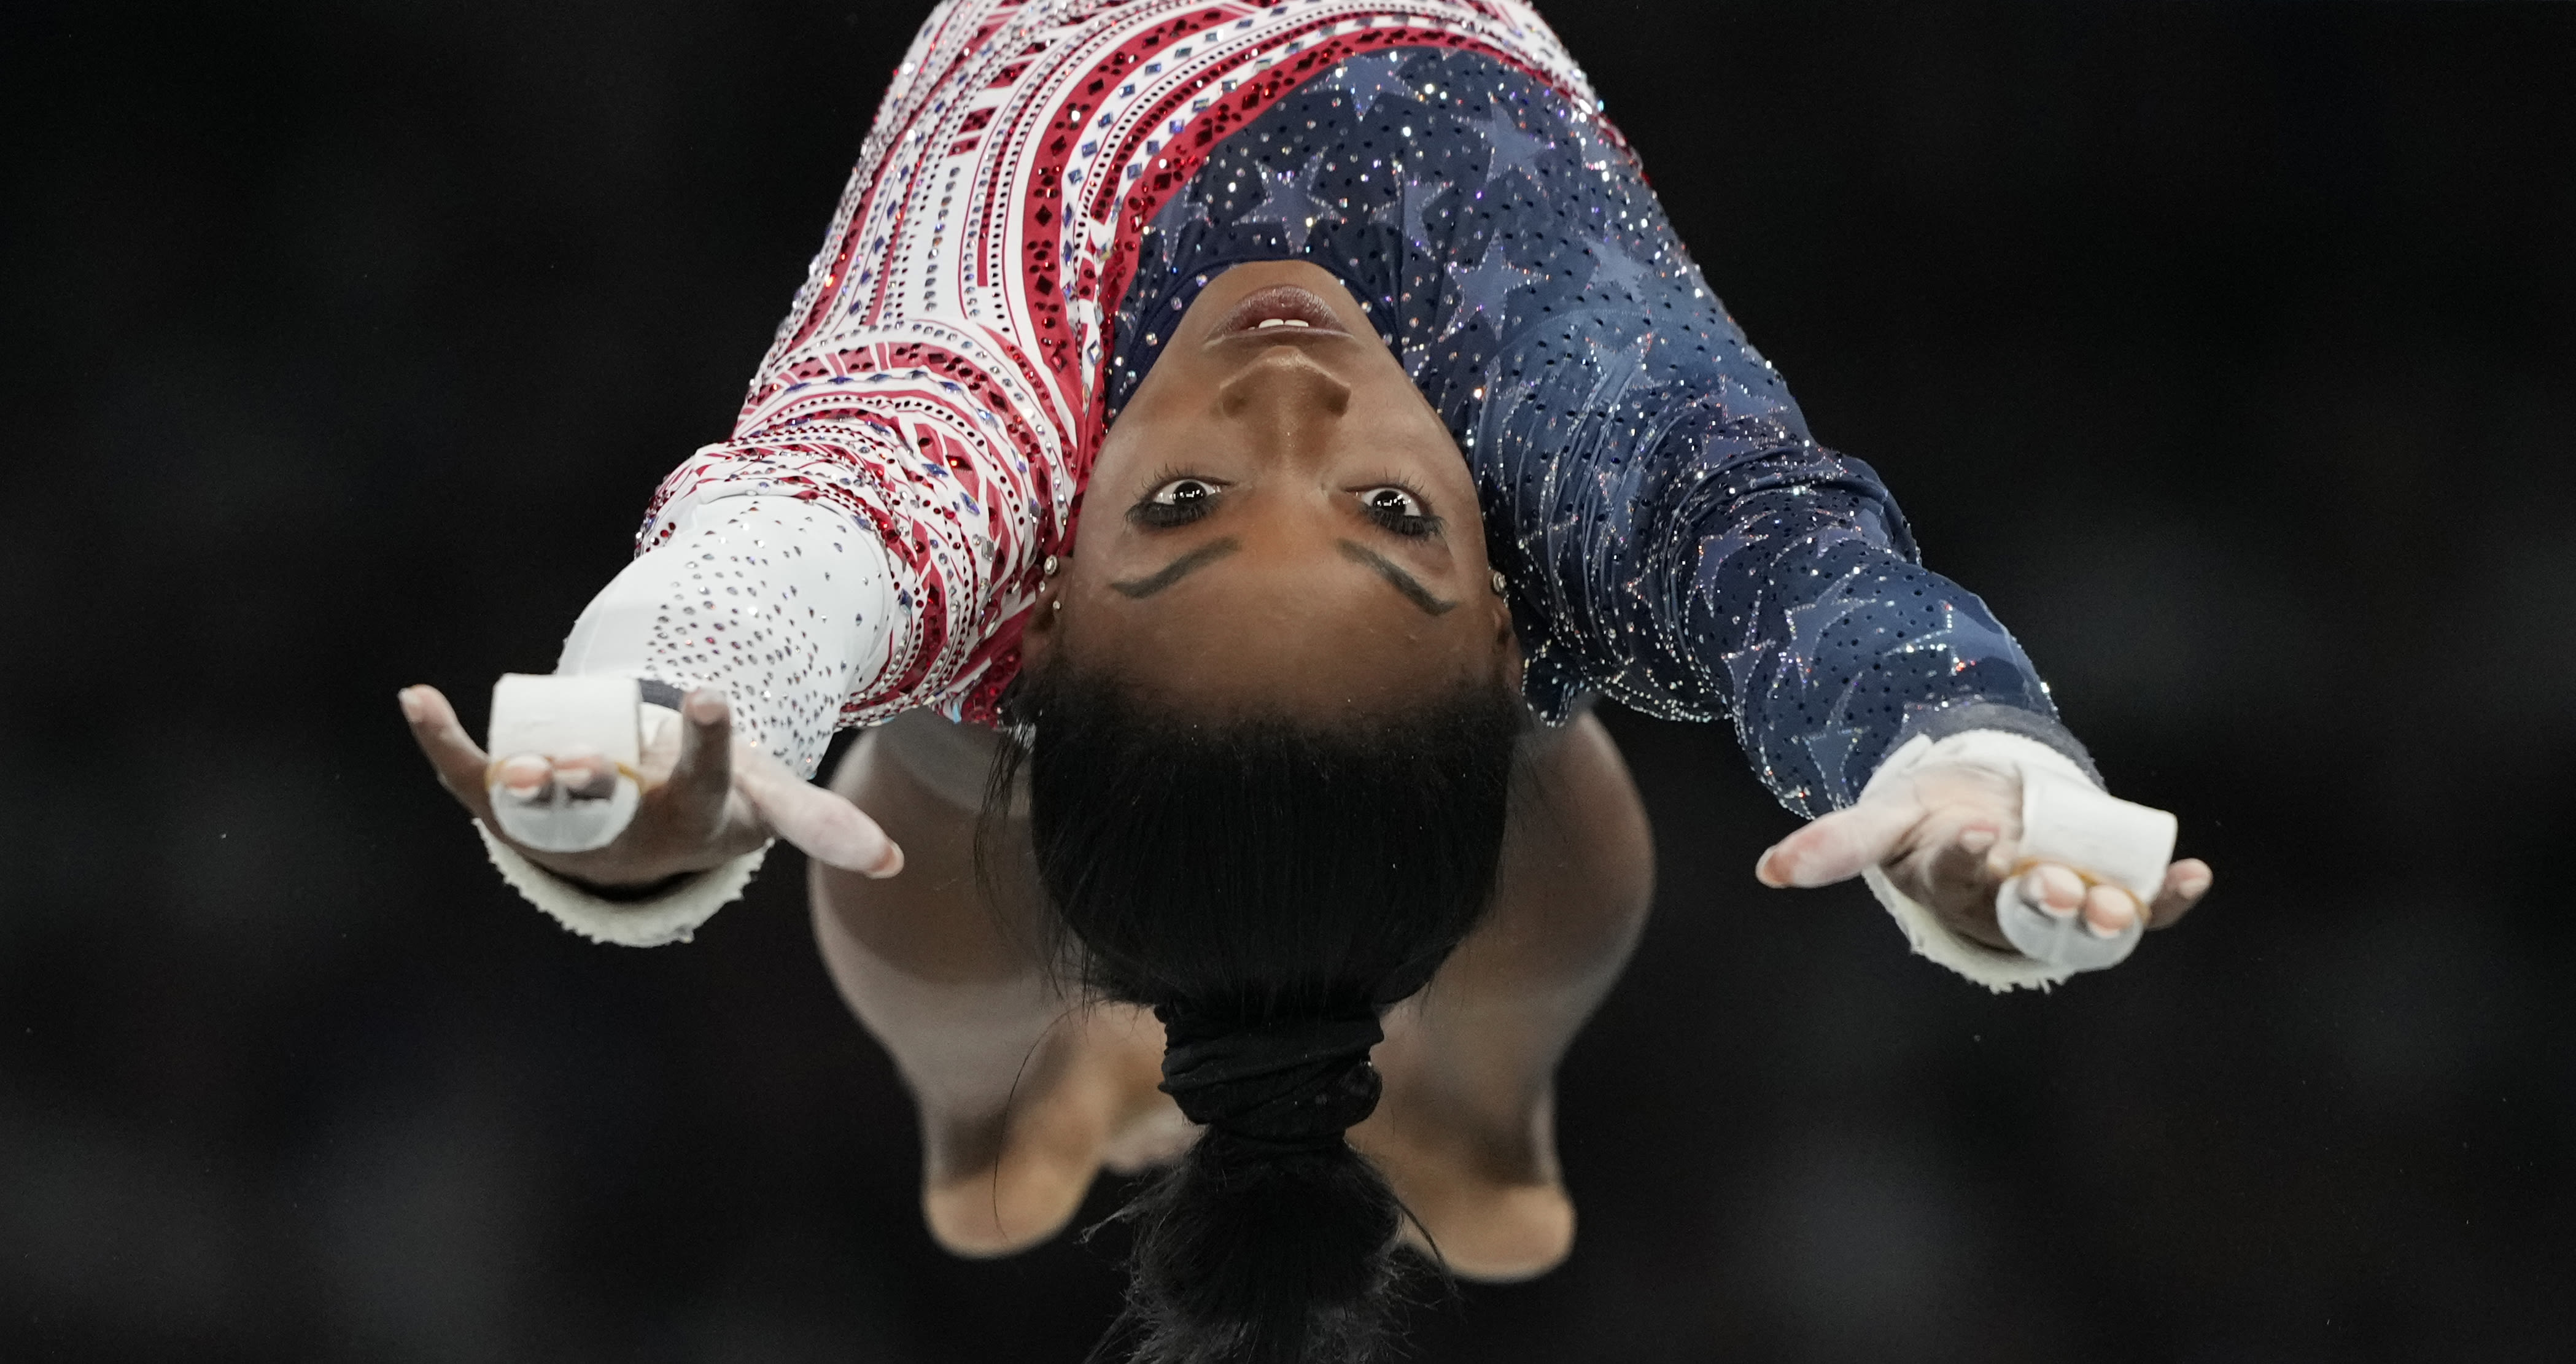 2024 Olympics photos: Simone Biles's triumphant return, Deng Yawen flies on her BMX and more stunning moments from the Summer Games